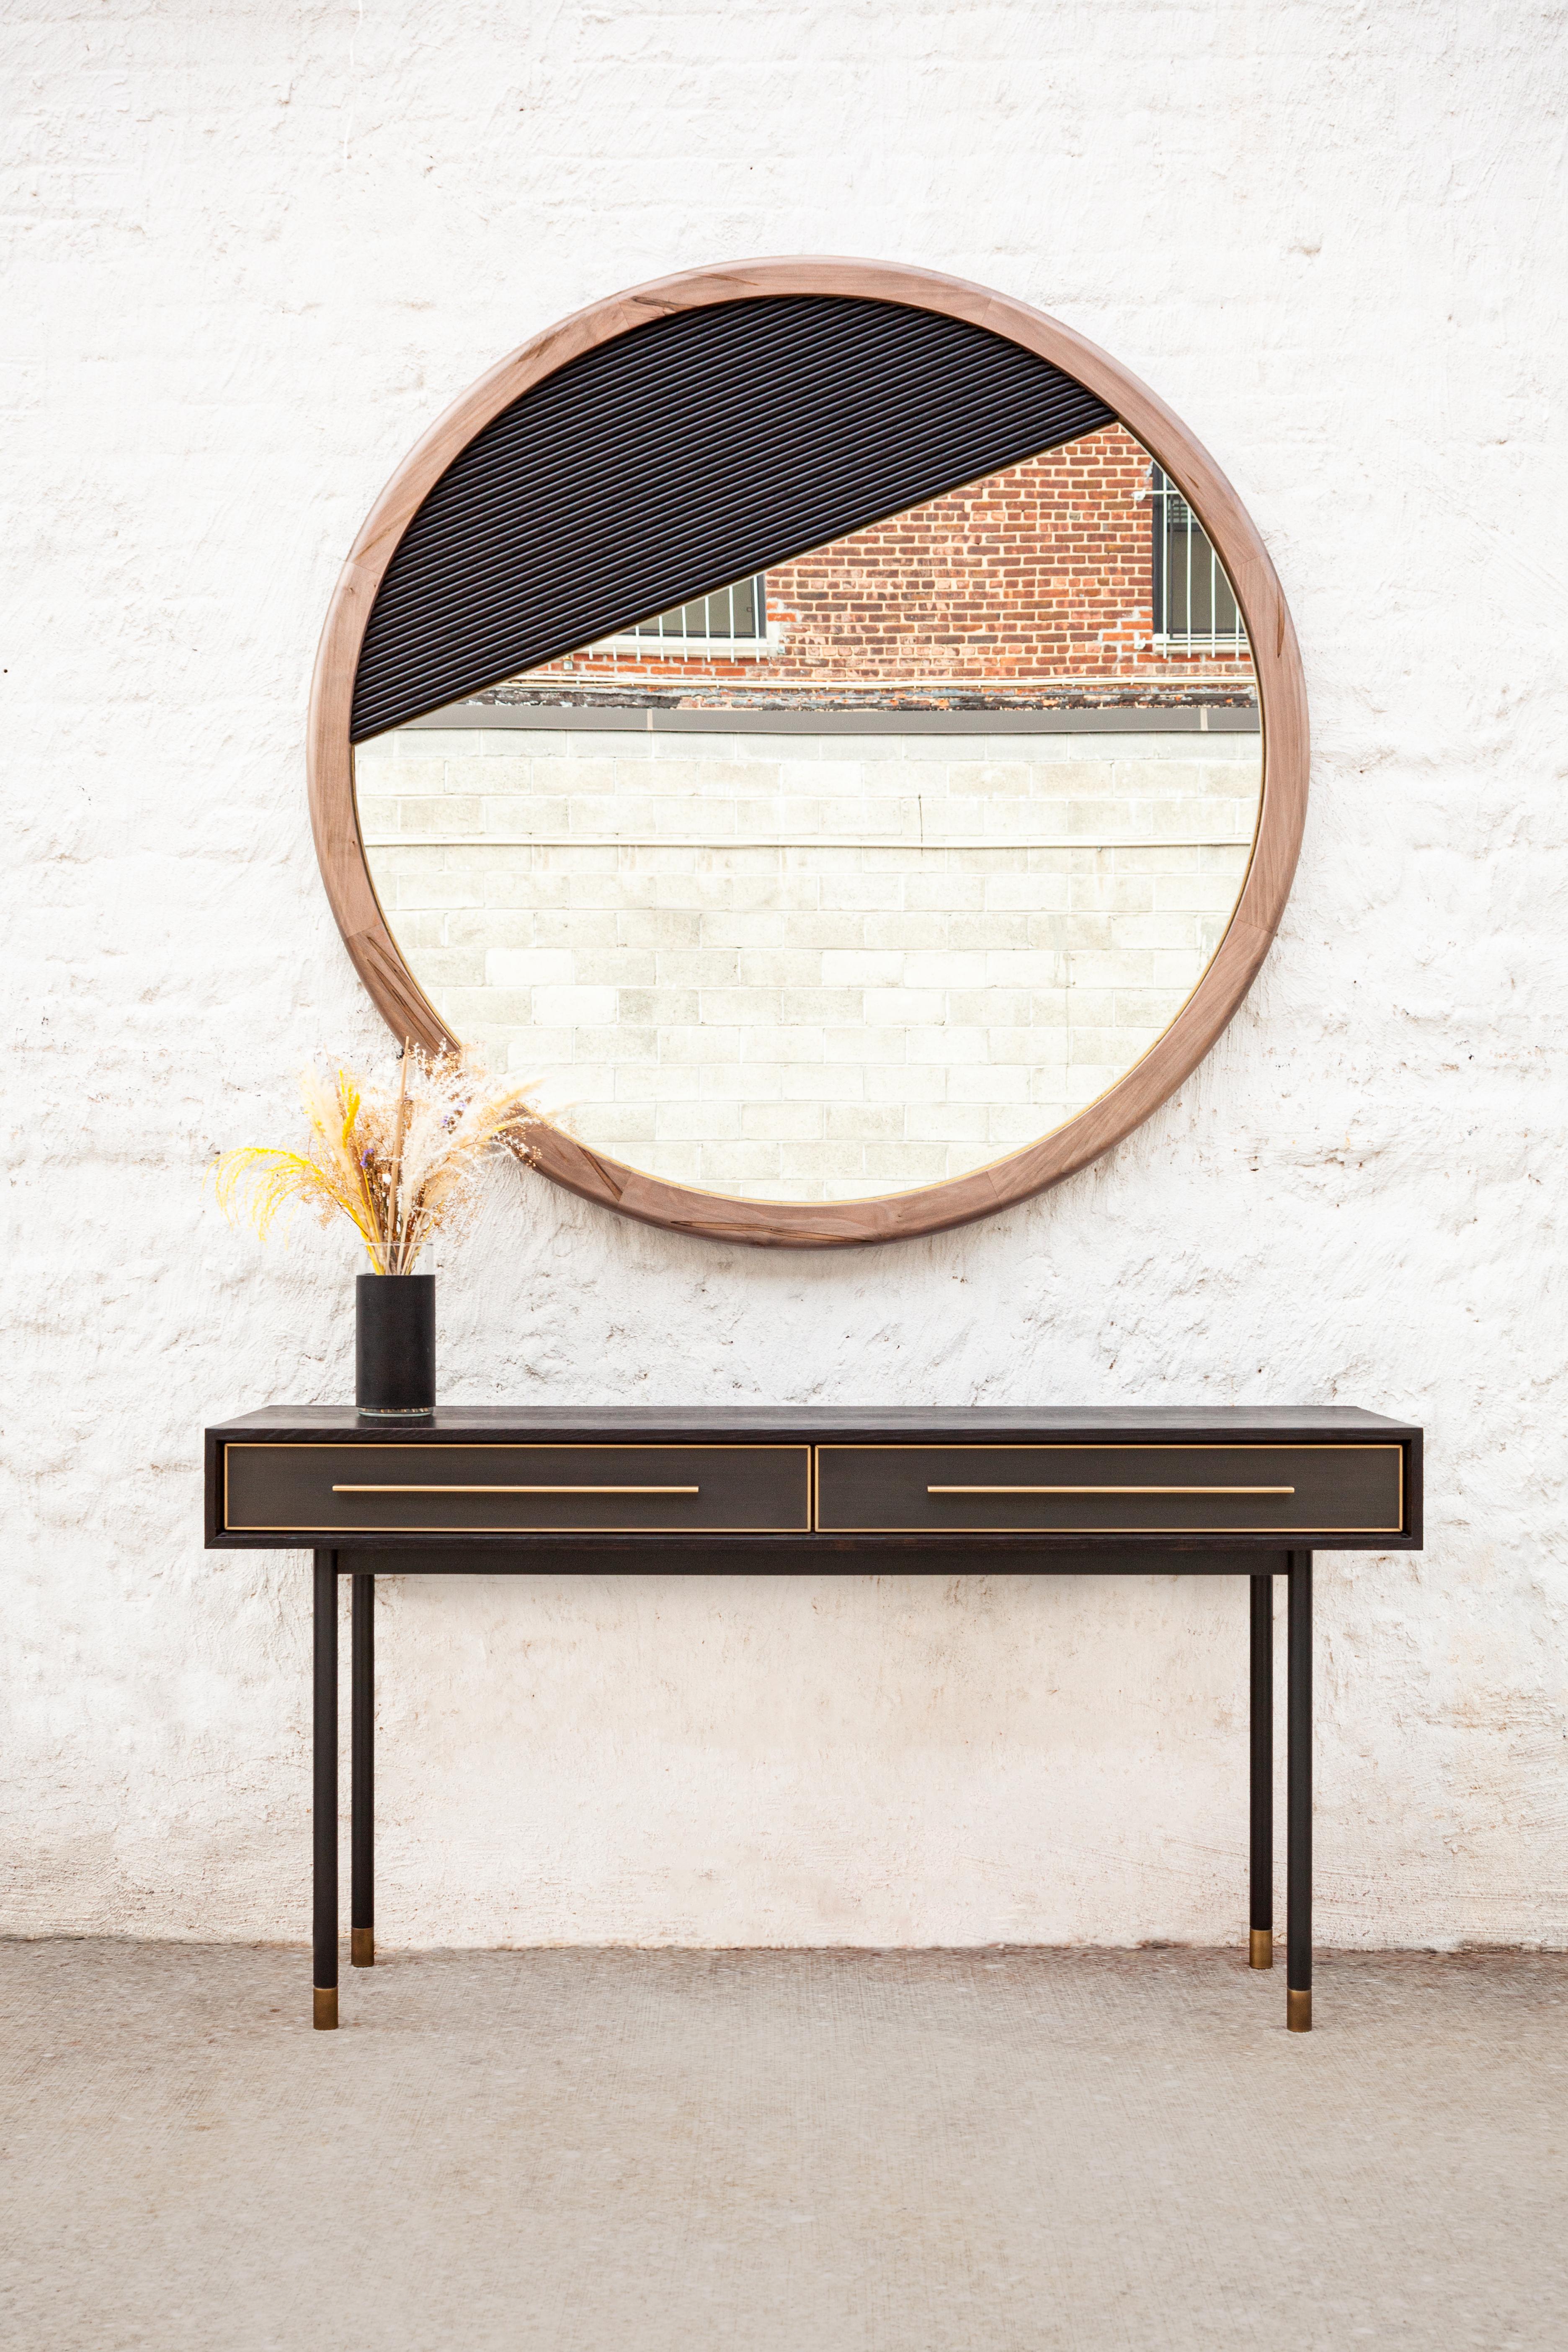 We like surprises, like the hint of gold leaf peeking out from the frame, and fluted white oak overlay, on our Kenmare mirror. A special collaboration with designer Melanie Morris, this bolder departure from previous pieces incorporates some of our